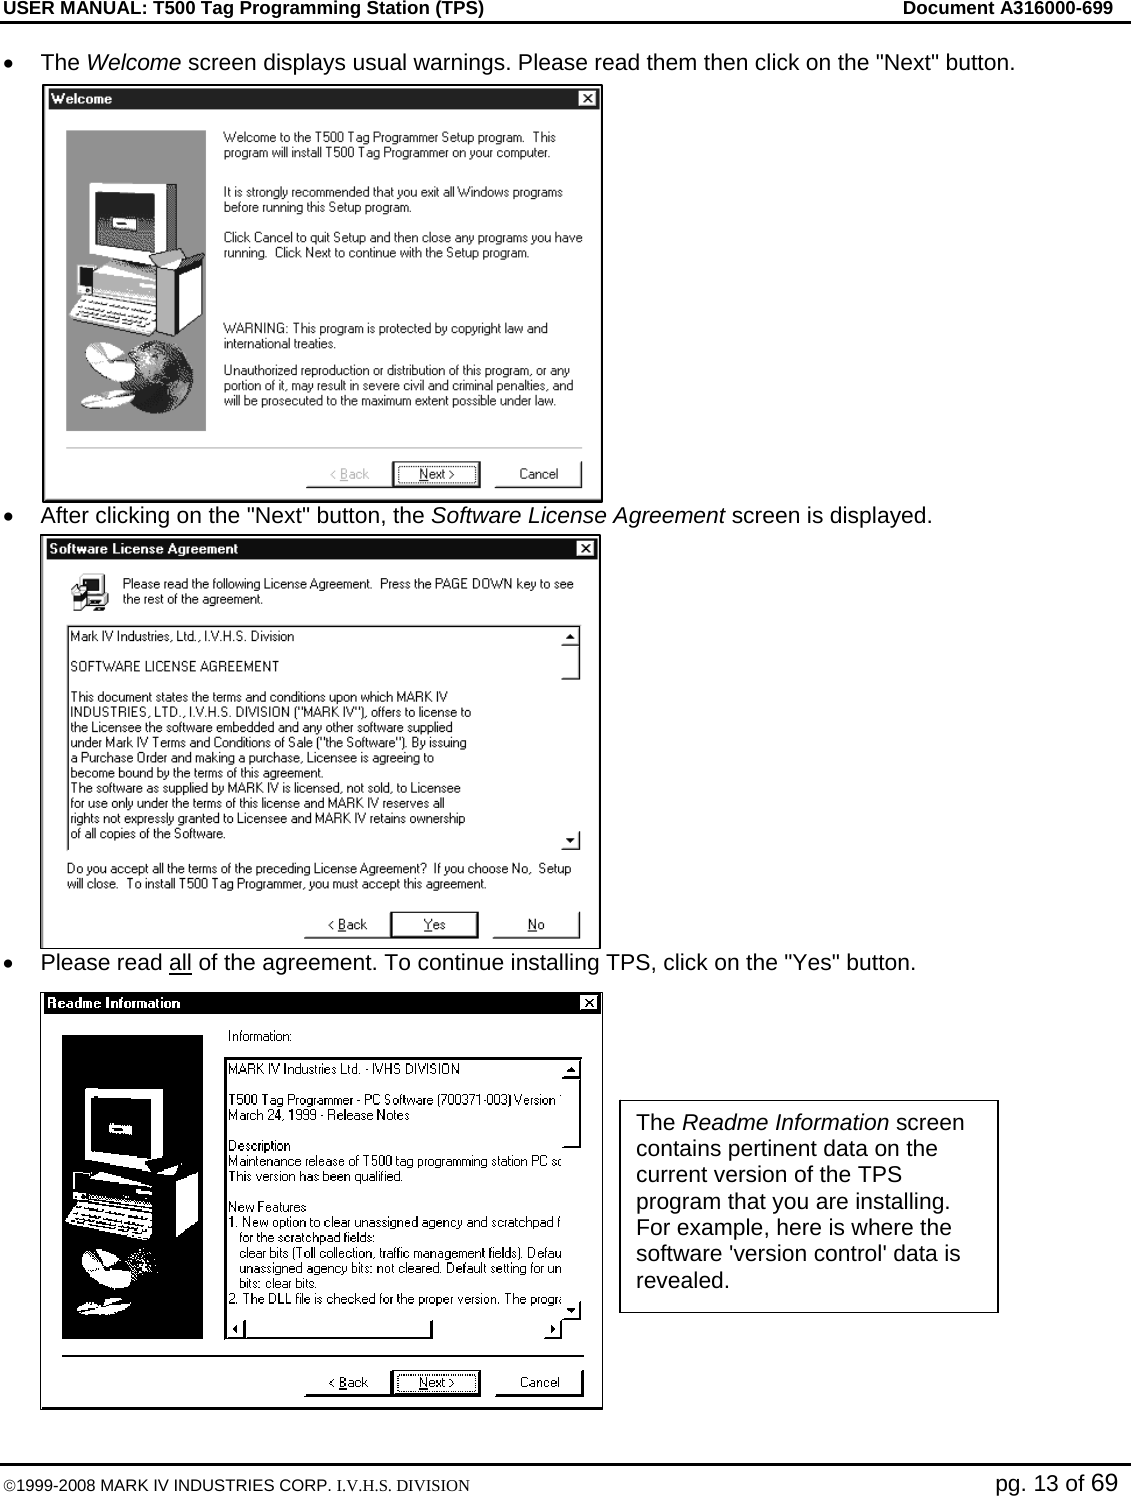 USER MANUAL: T500 Tag Programming Station (TPS)     Document A316000-699  ©1999-2008 MARK IV INDUSTRIES CORP. I.V.H.S. DIVISION   pg. 13 of 69 • The Welcome screen displays usual warnings. Please read them then click on the &quot;Next&quot; button. •  After clicking on the &quot;Next&quot; button, the Software License Agreement screen is displayed. •  Please read all of the agreement. To continue installing TPS, click on the &quot;Yes&quot; button. The Readme Information screen contains pertinent data on the current version of the TPS program that you are installing. For example, here is where the software &apos;version control&apos; data is revealed. 